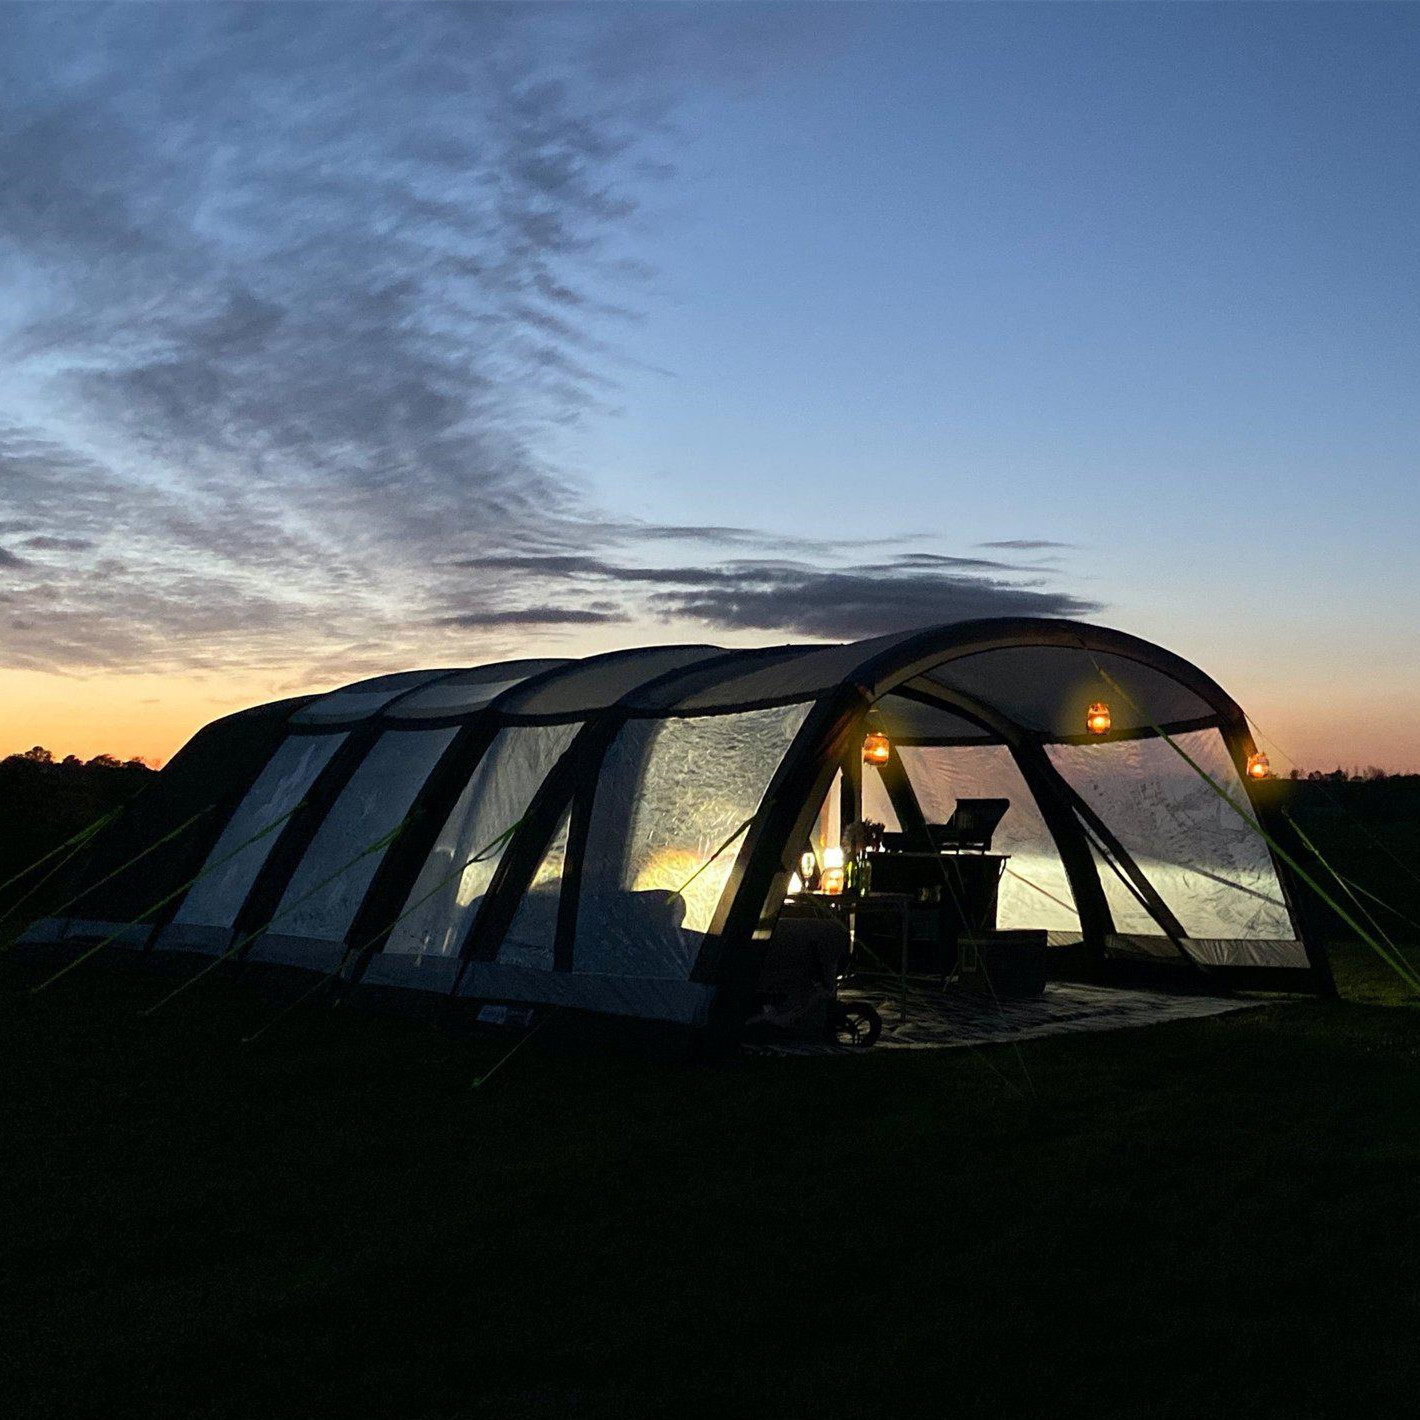 Inflatable Family Camping Tent